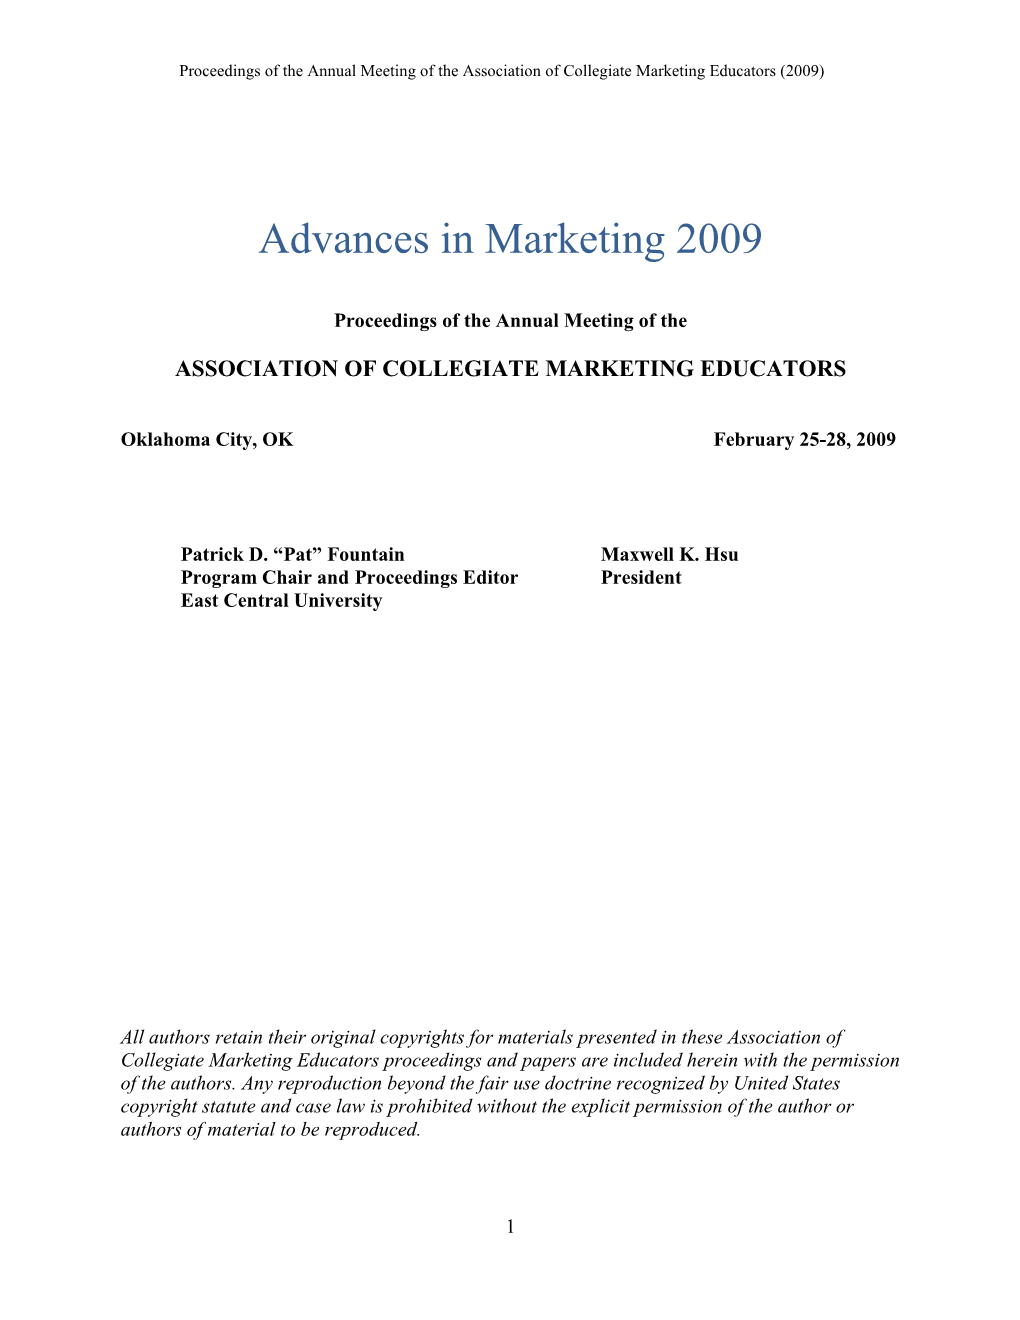 2009 Proceedings Will Continue to Do So in the Years to Come